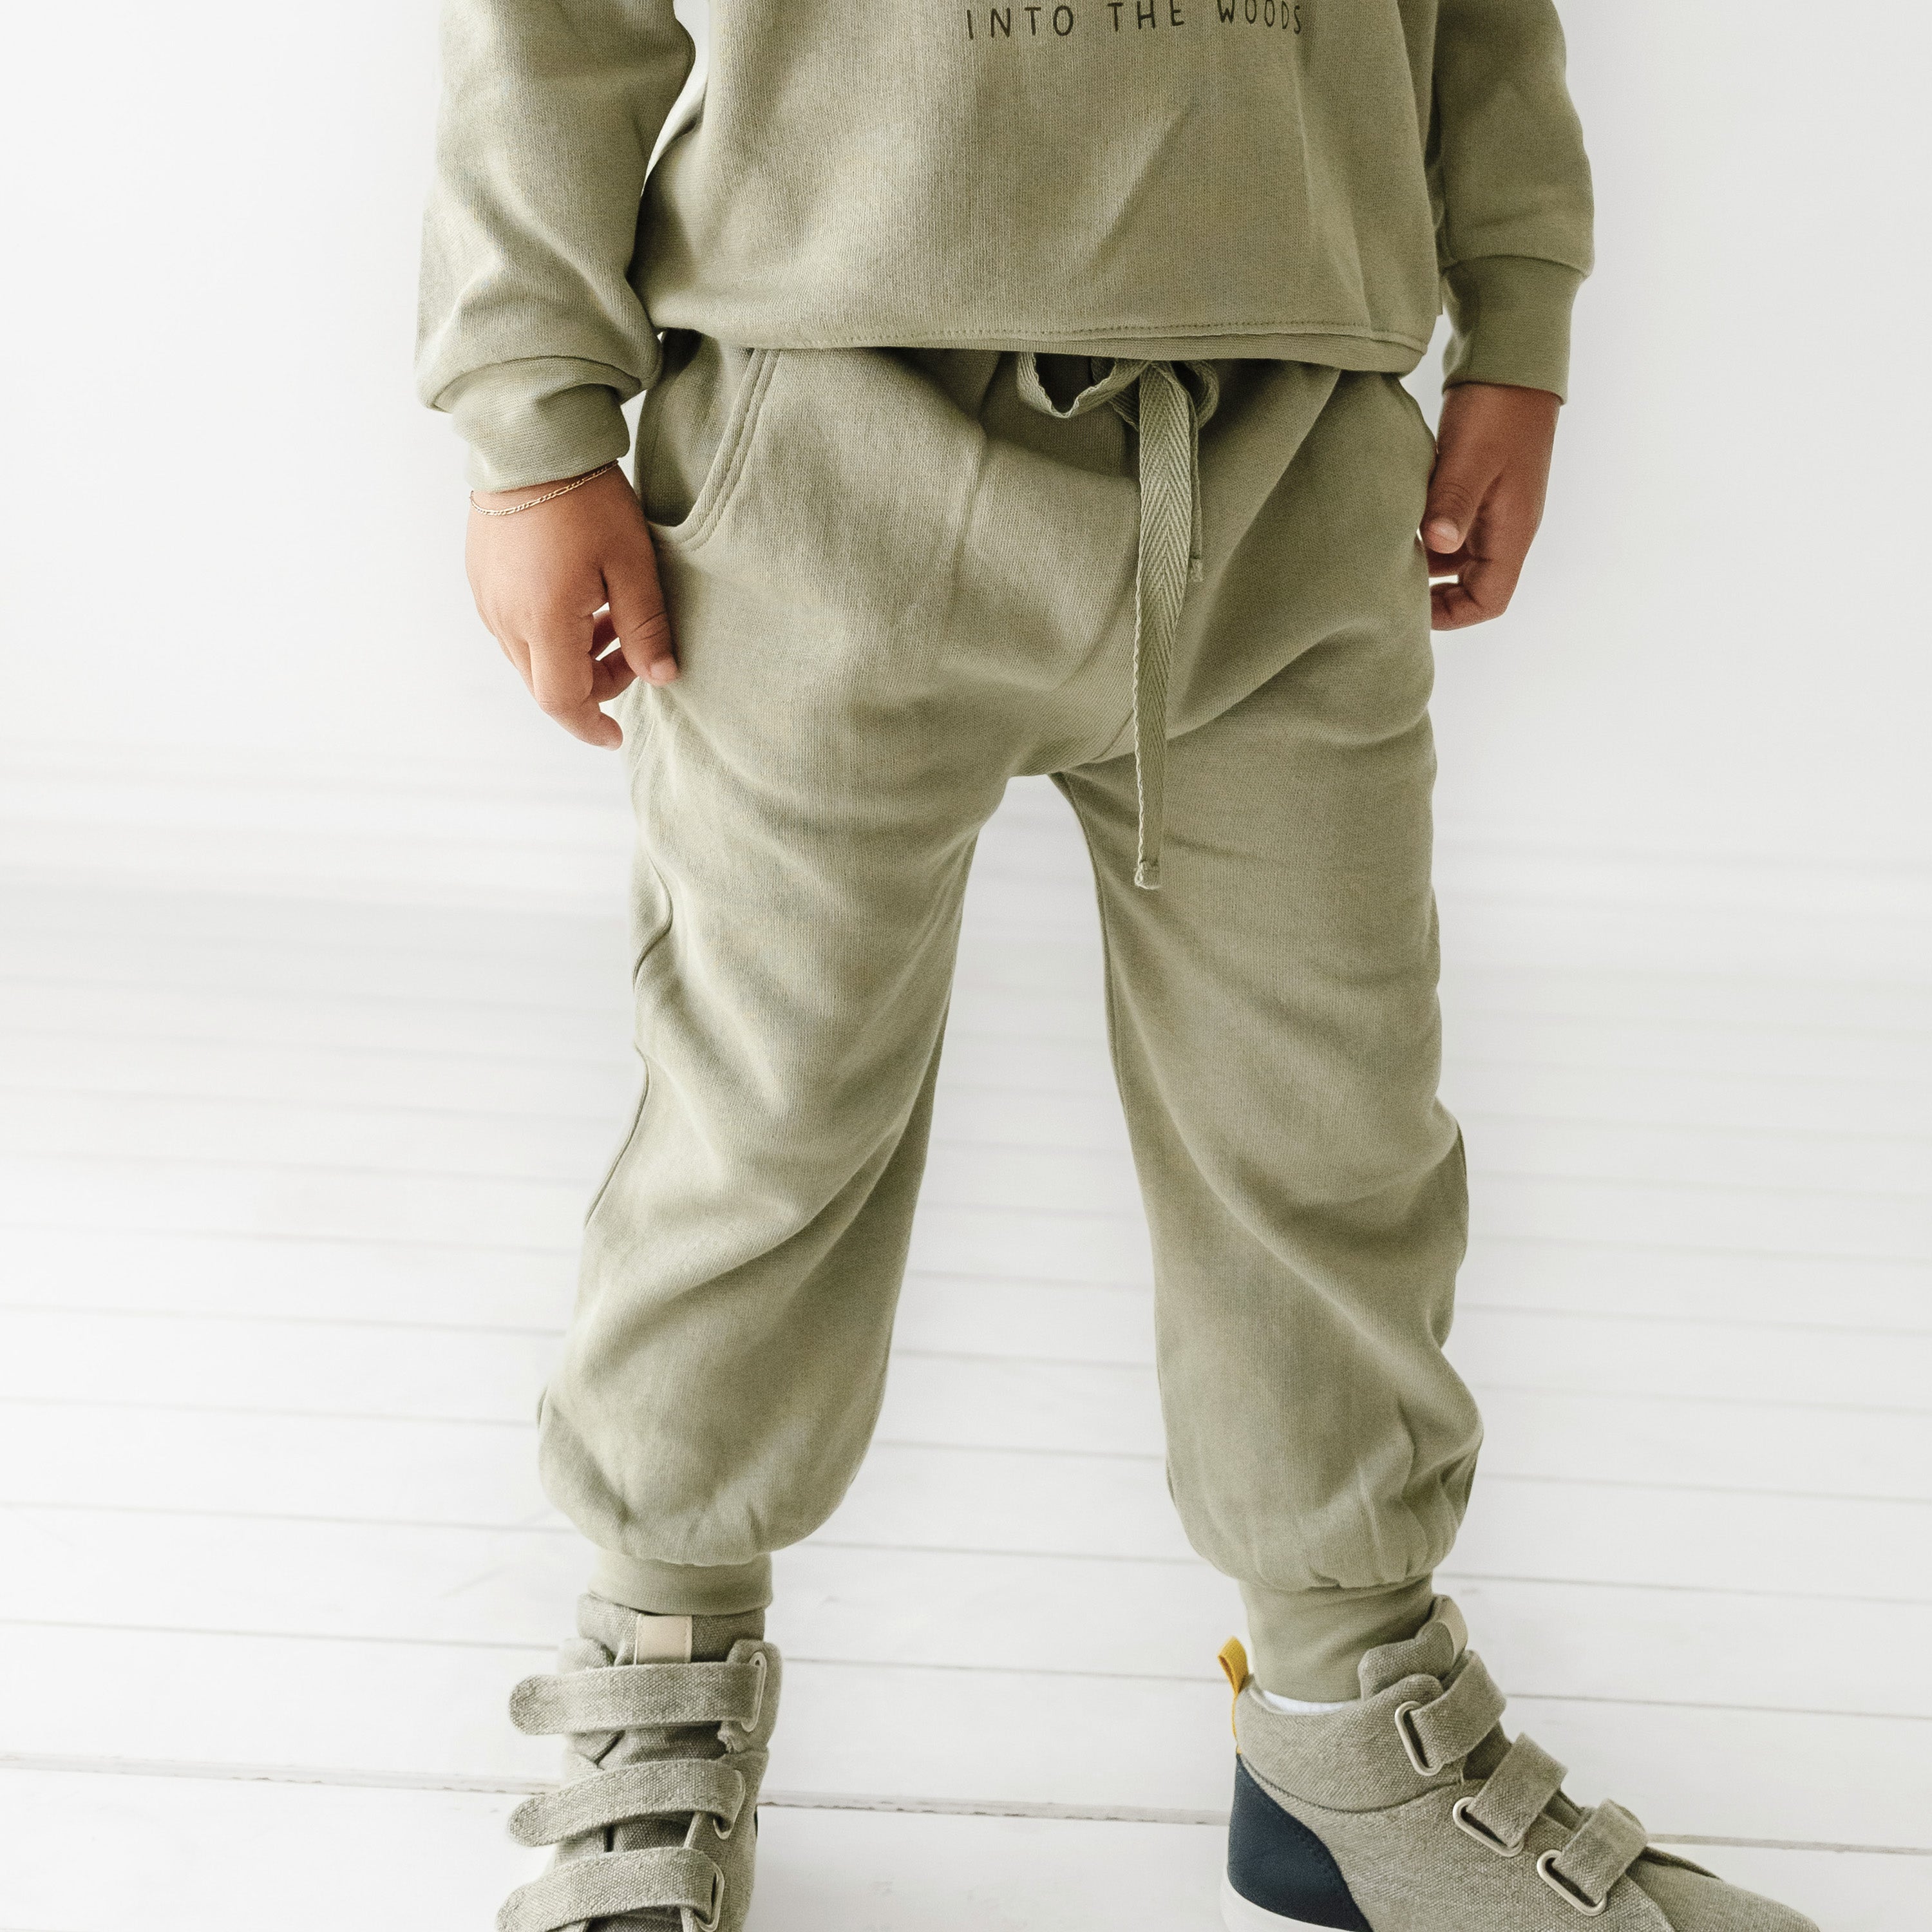 A child wearing Organic Baby's organic jogger pants in olive stands with hands in pockets, showing only the lower half of the body. The sweatshirt reads "into the